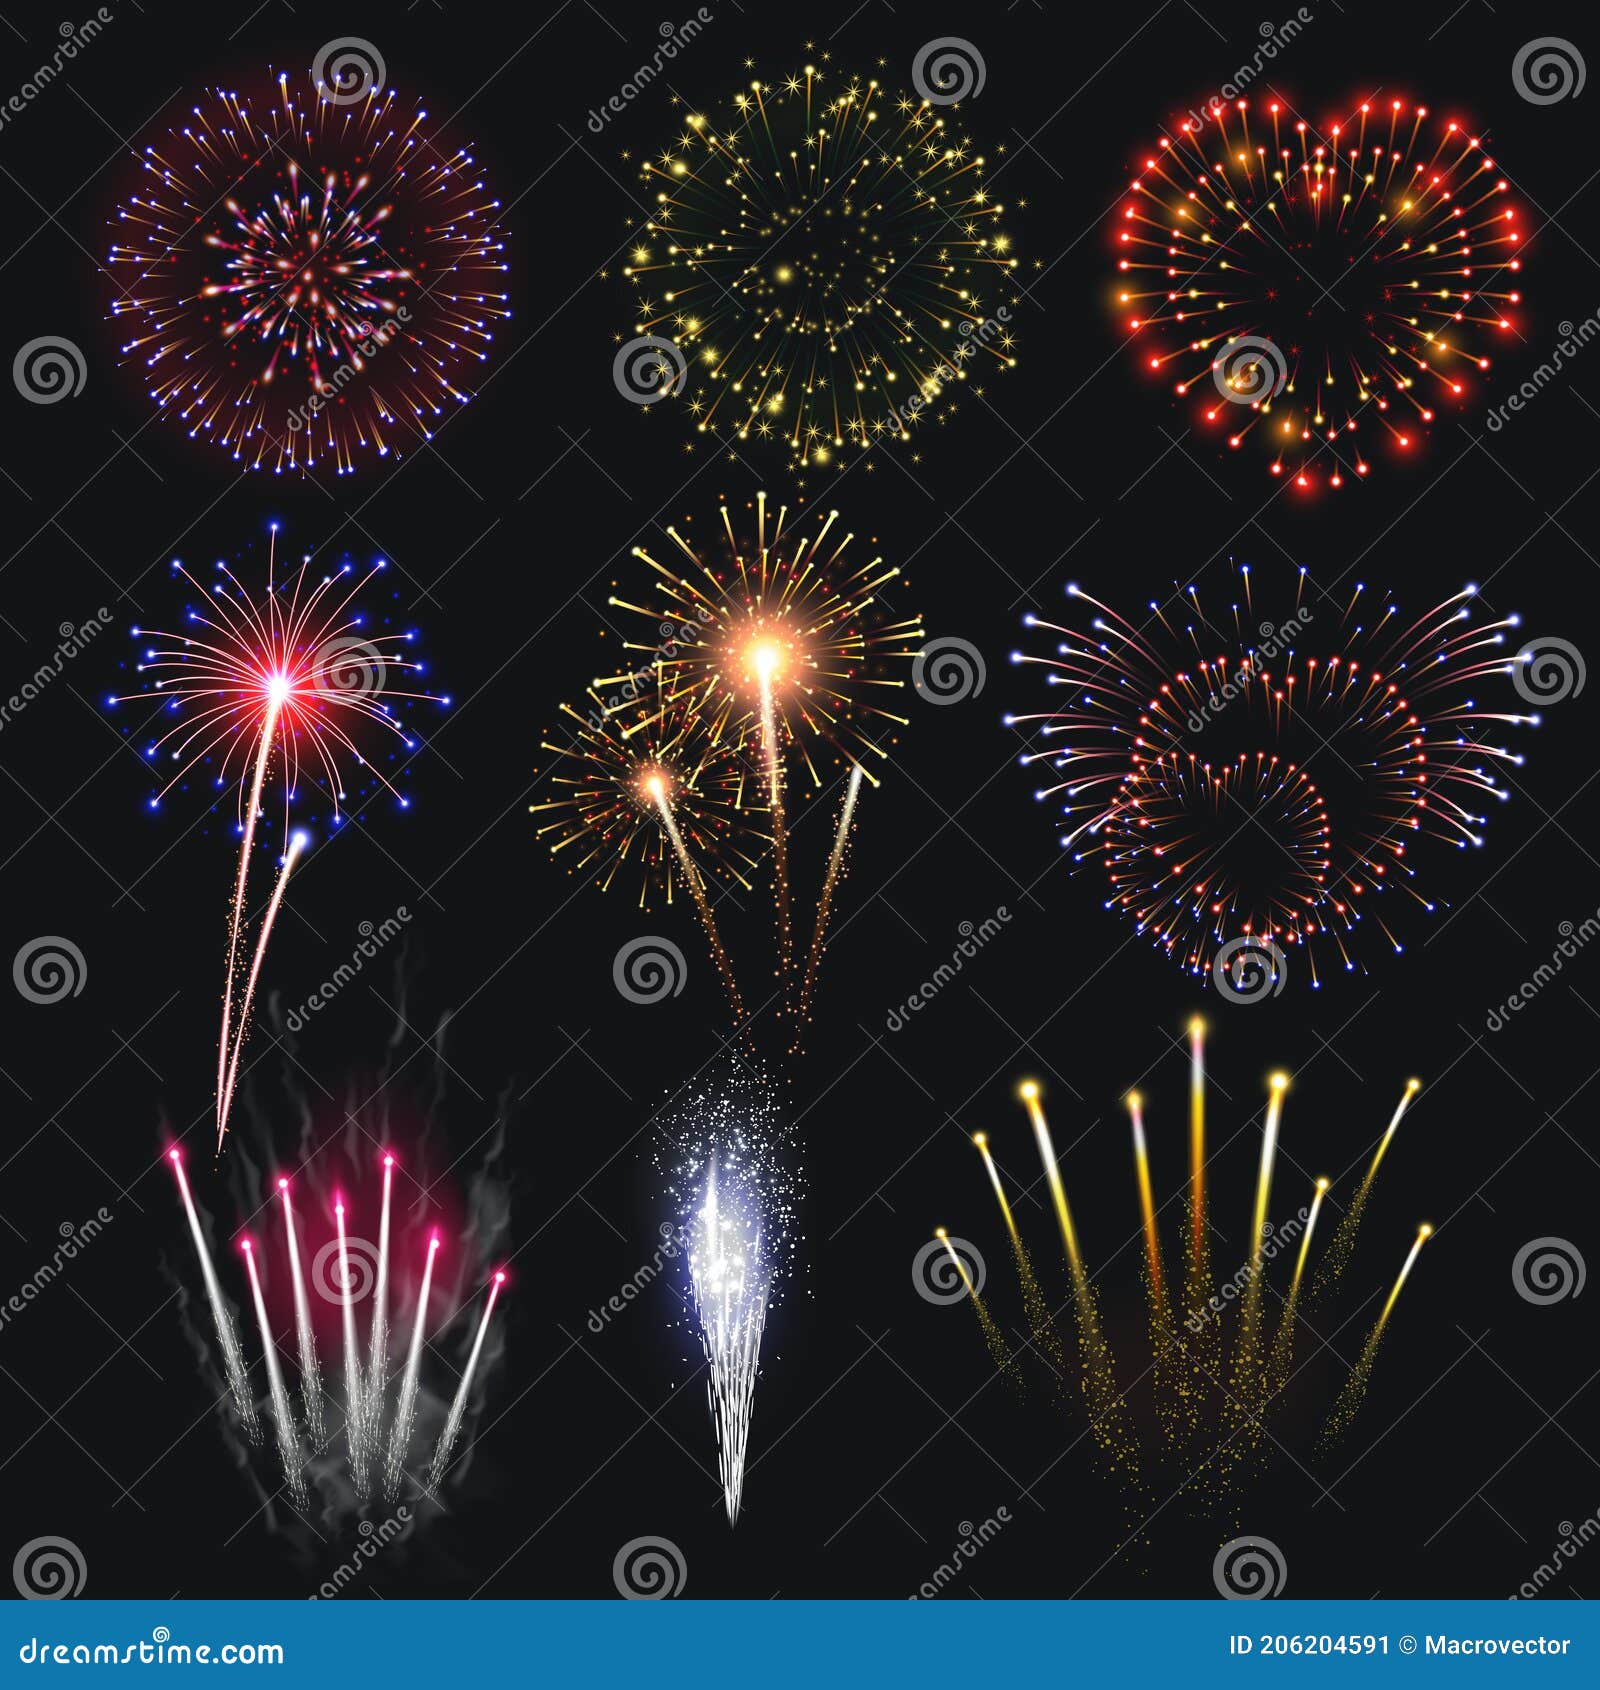 pyrotechnics and fireworks realistic set